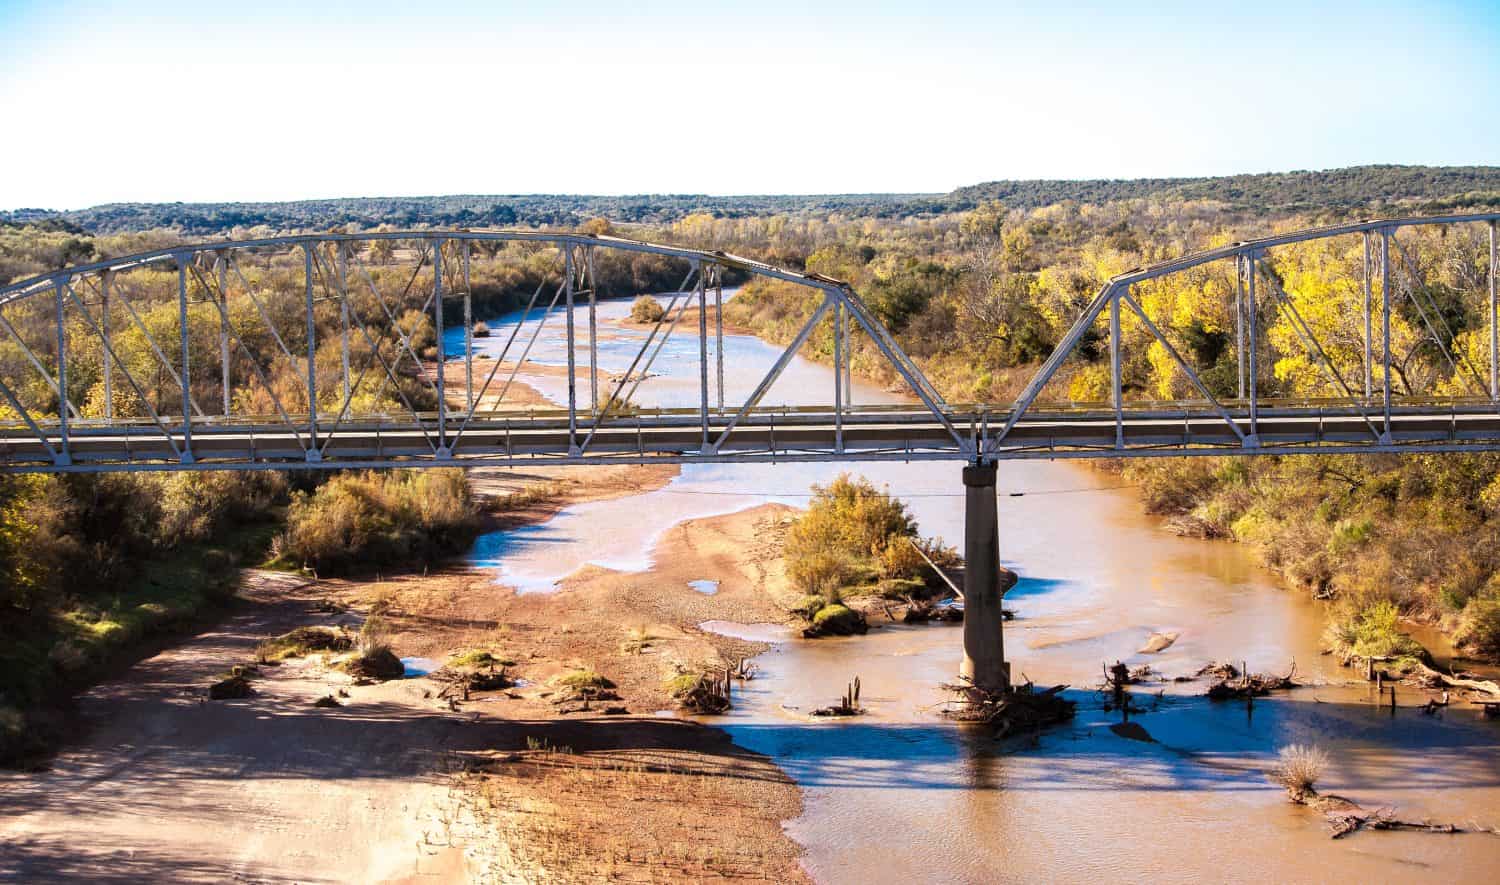 Bridge over the red river in central Texas.  The Red River, or sometimes the Red River of the South, is a major tributary of the Mississippi